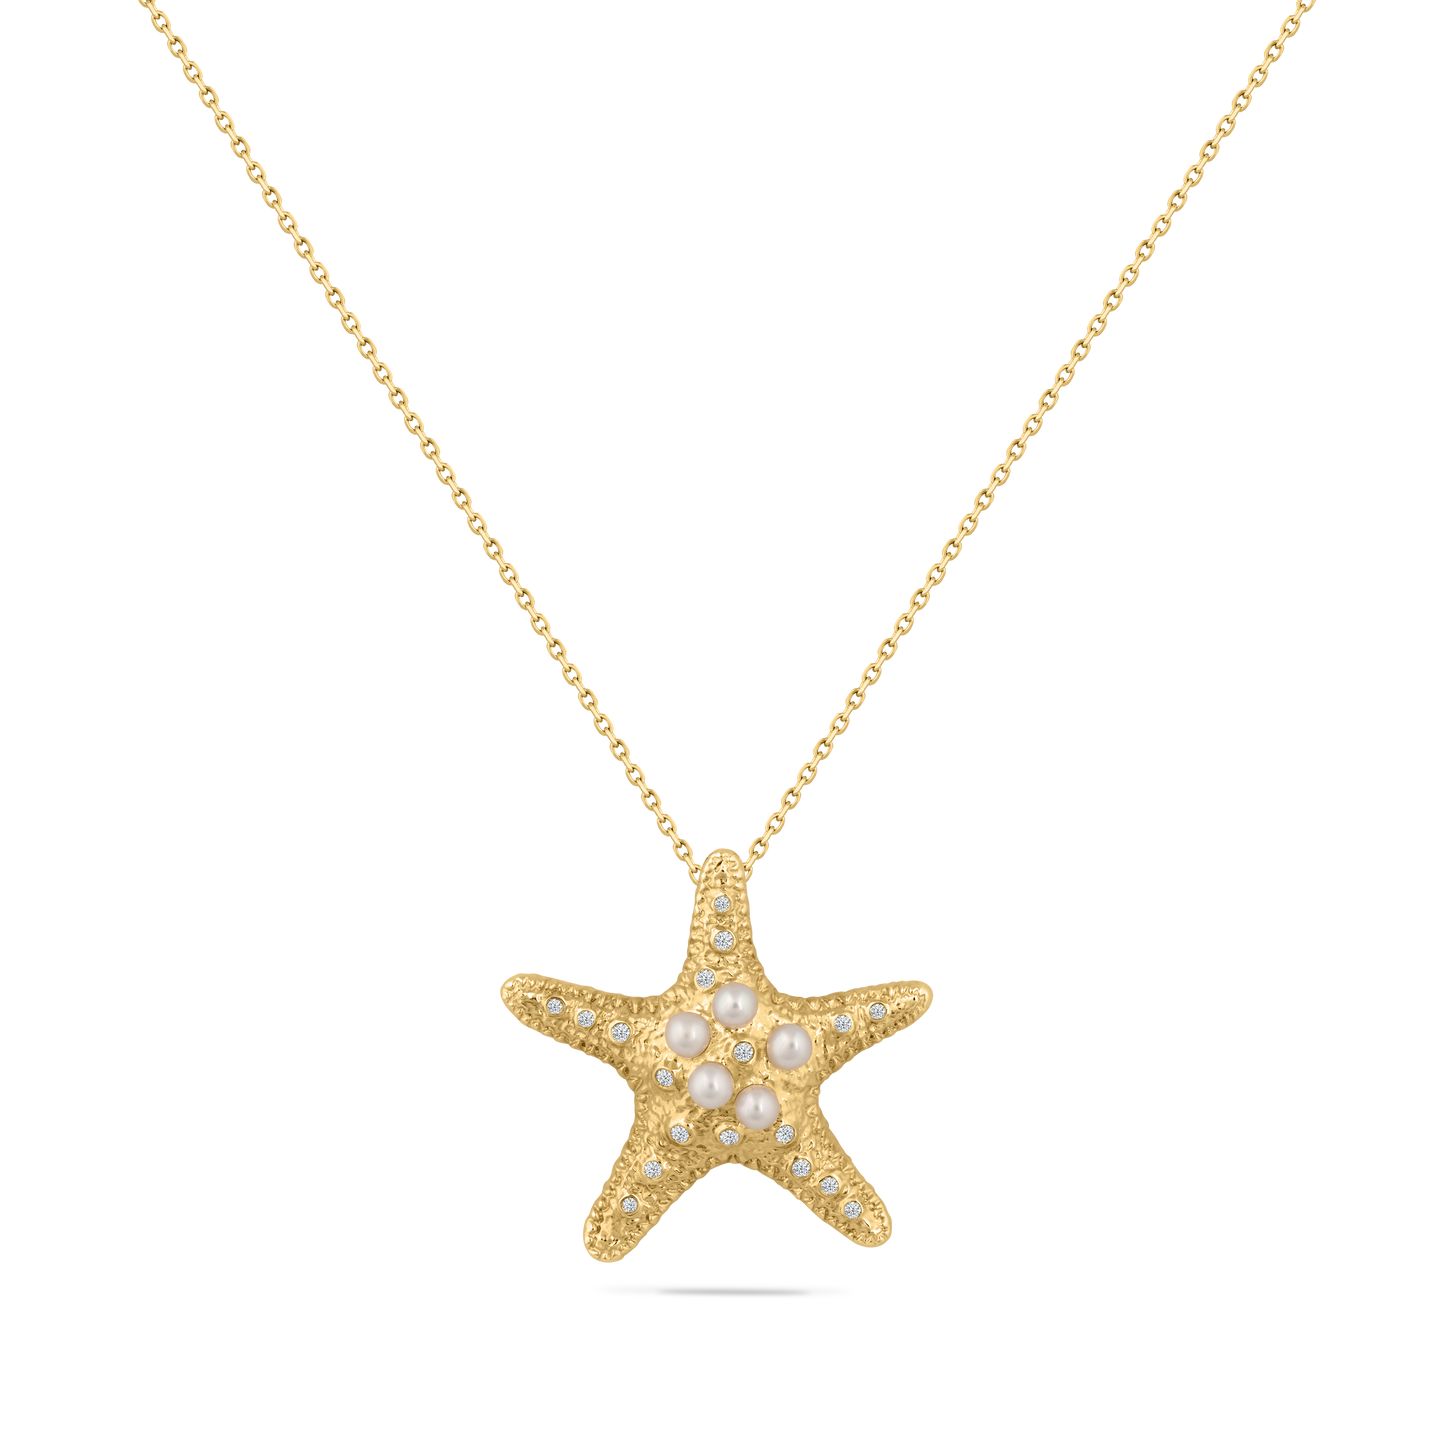 14K STAR FISH PENDANT WITH 18 DIAMONDS 0.099CT AND 5 CENTRAL PEARLS ON 18 INCHES CABLE CHAIN